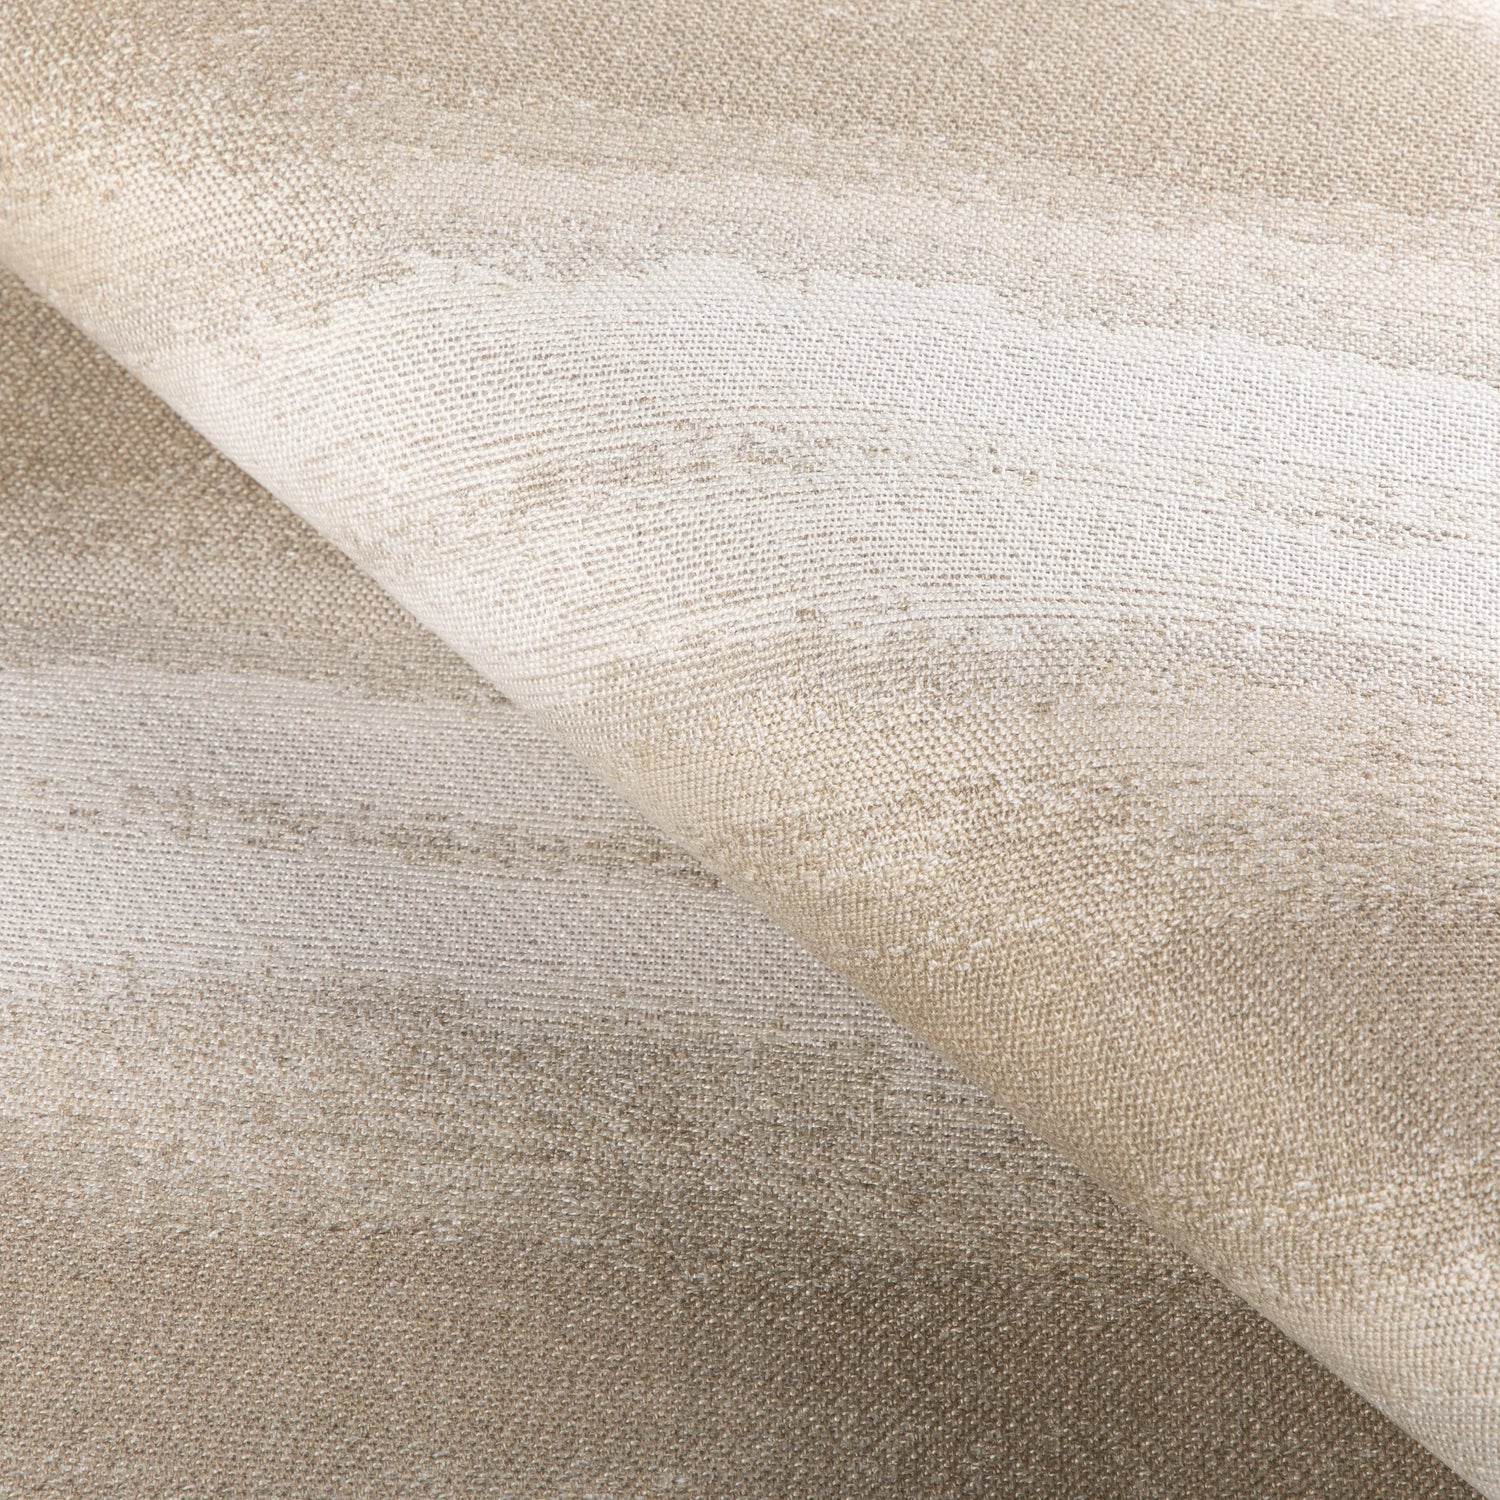 Fabric sample of Riverwalk fabric in sand color - pattern 36932.16.0 - by Kravet Couture in the Riviera collection